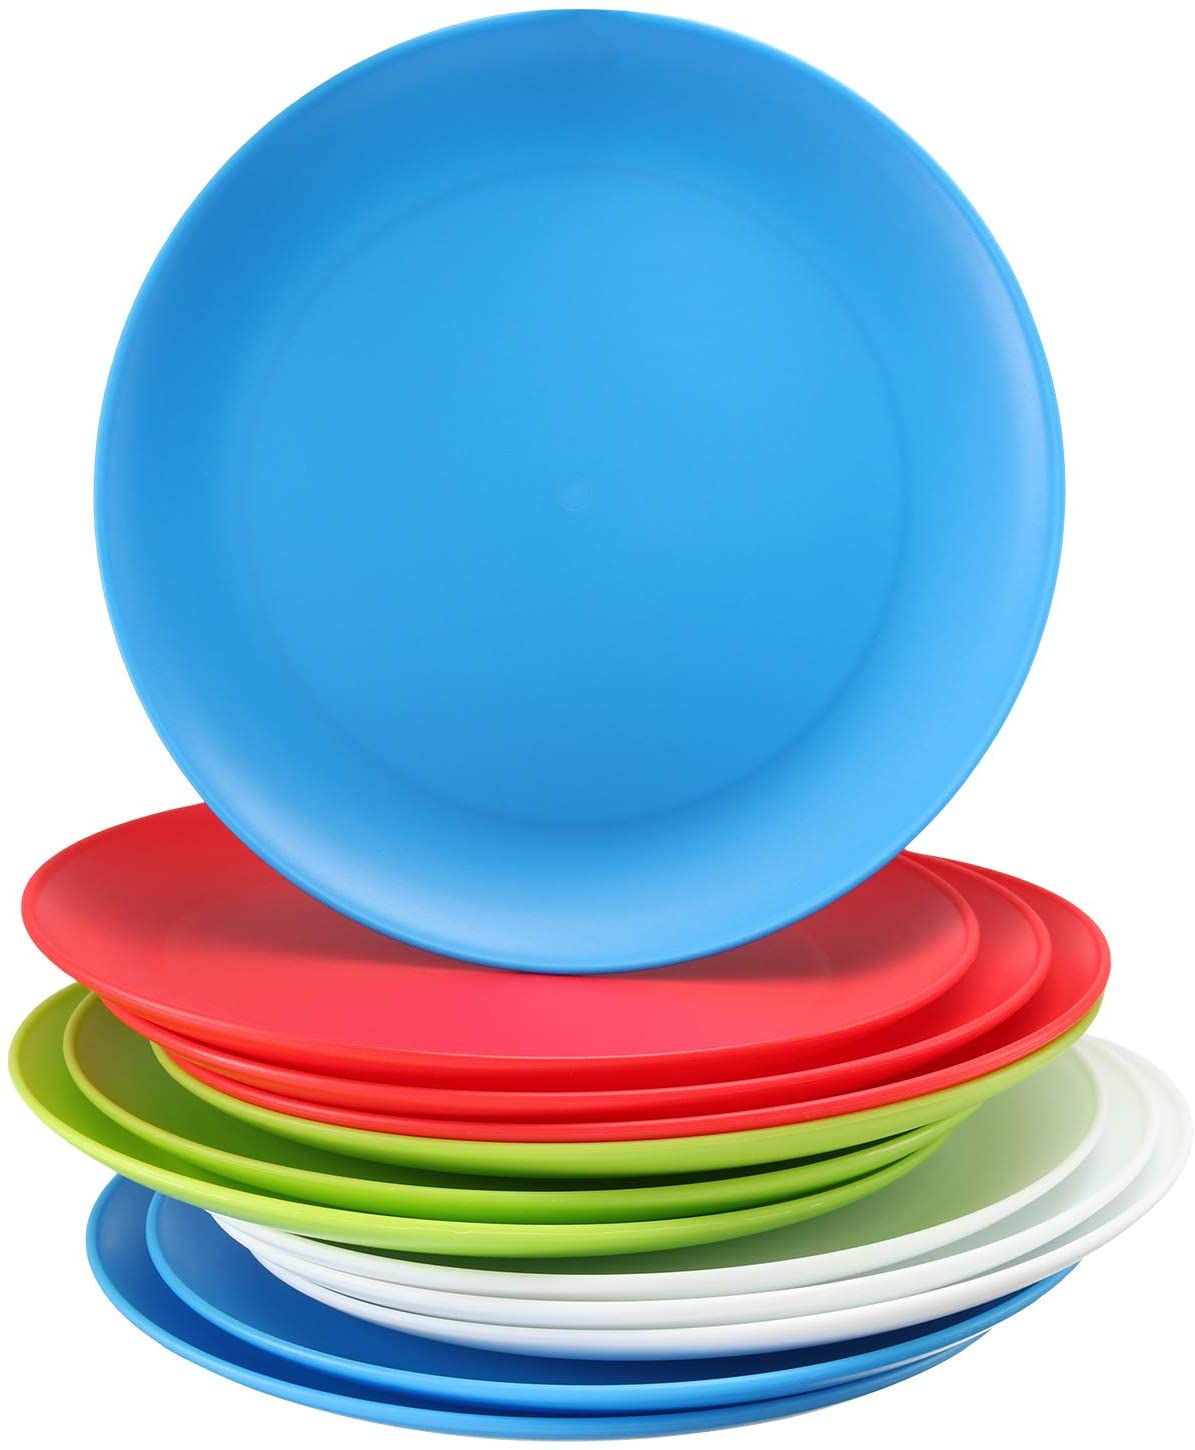 Single-use plastic plates and cutlery to be banned in England, Plastics